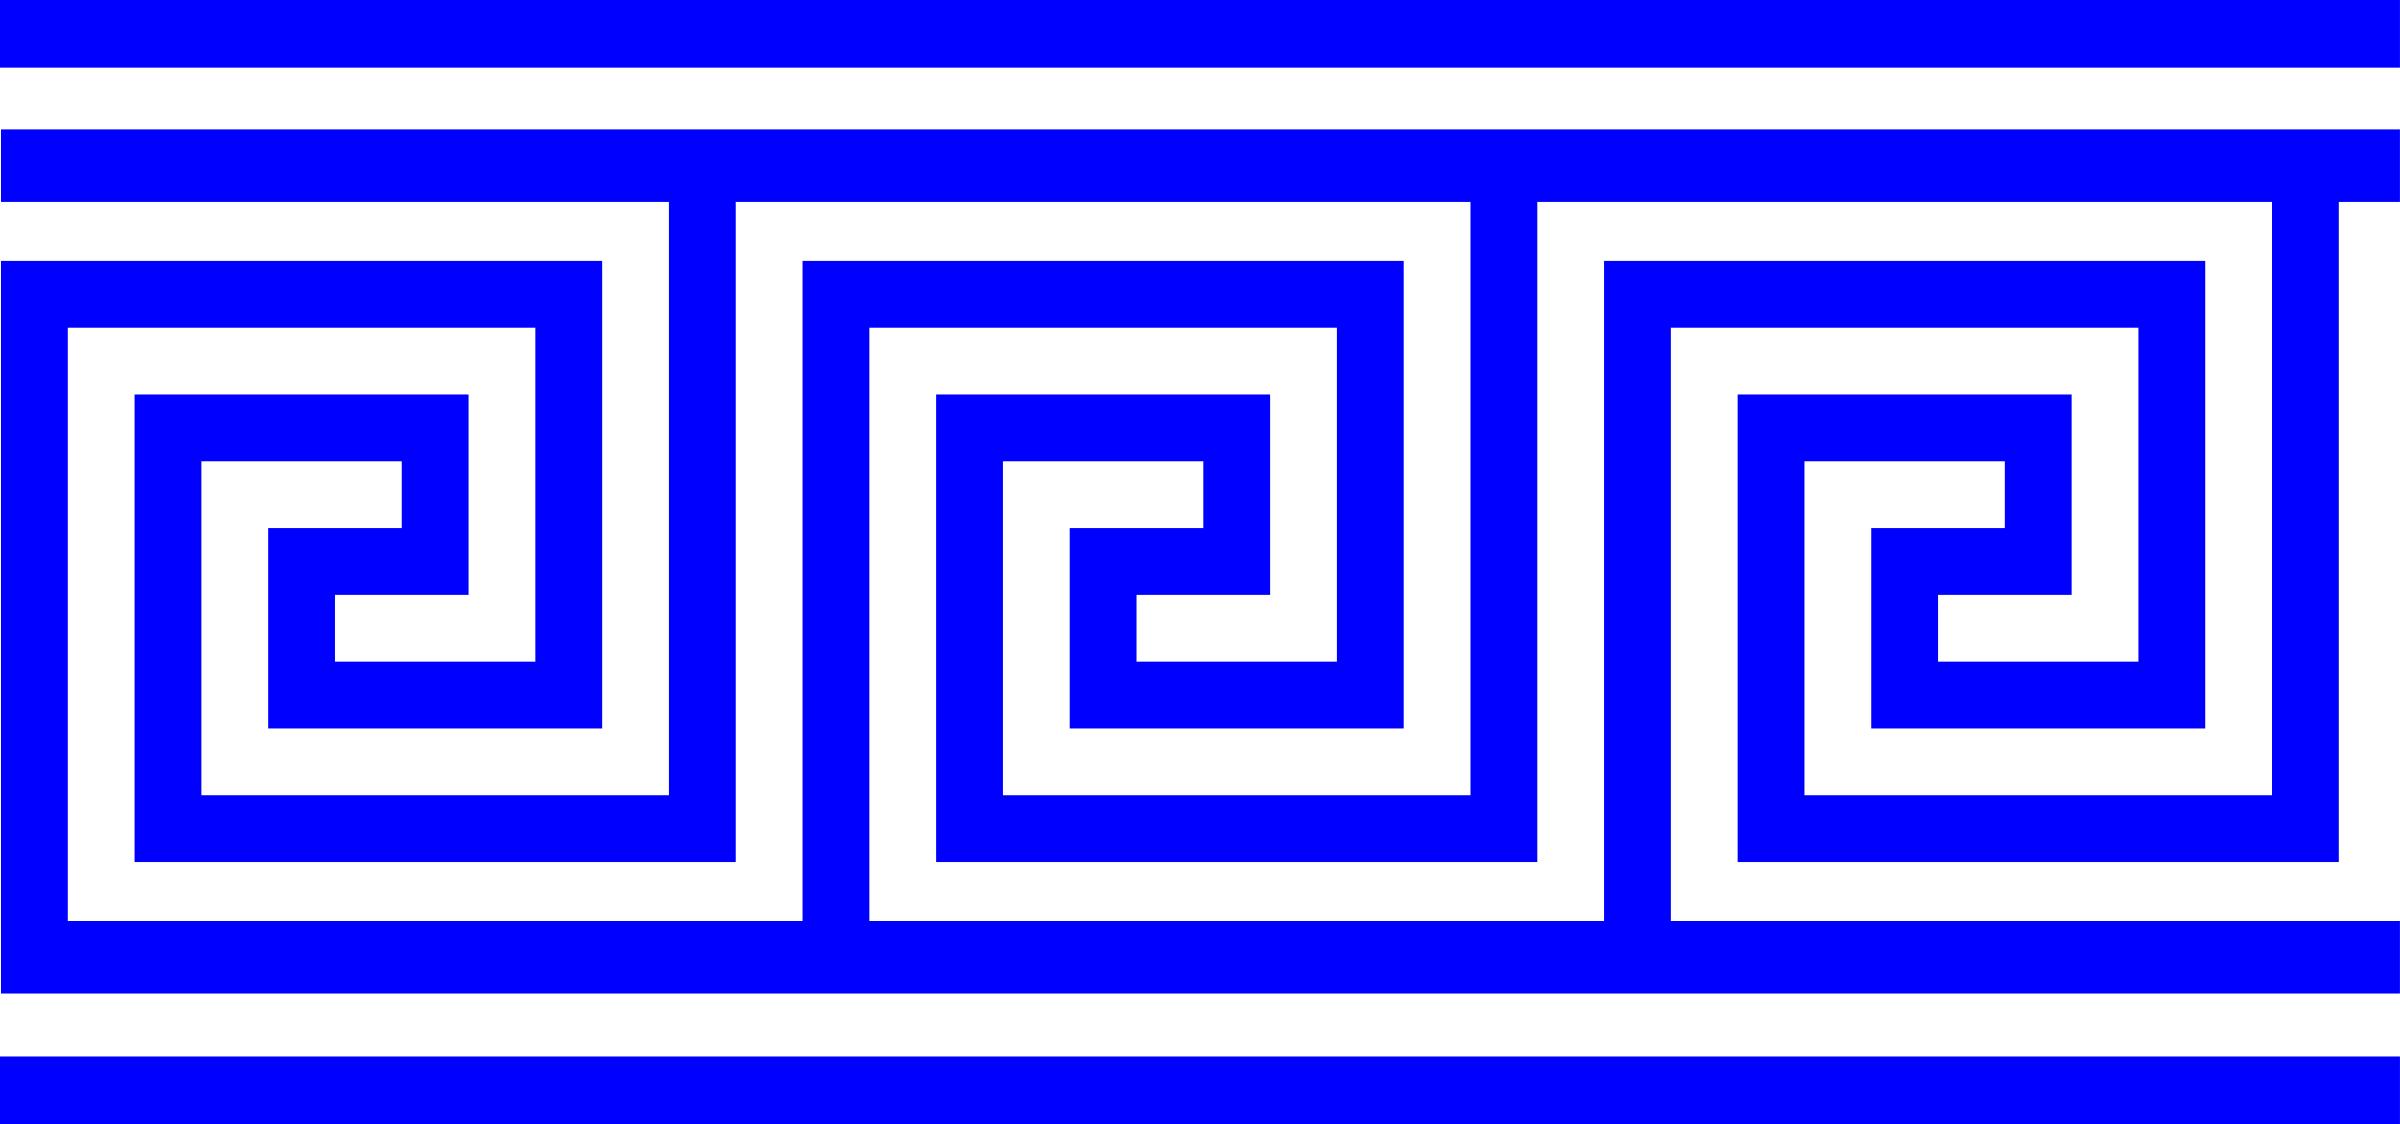  Repeating Border Greek Key With Lines png